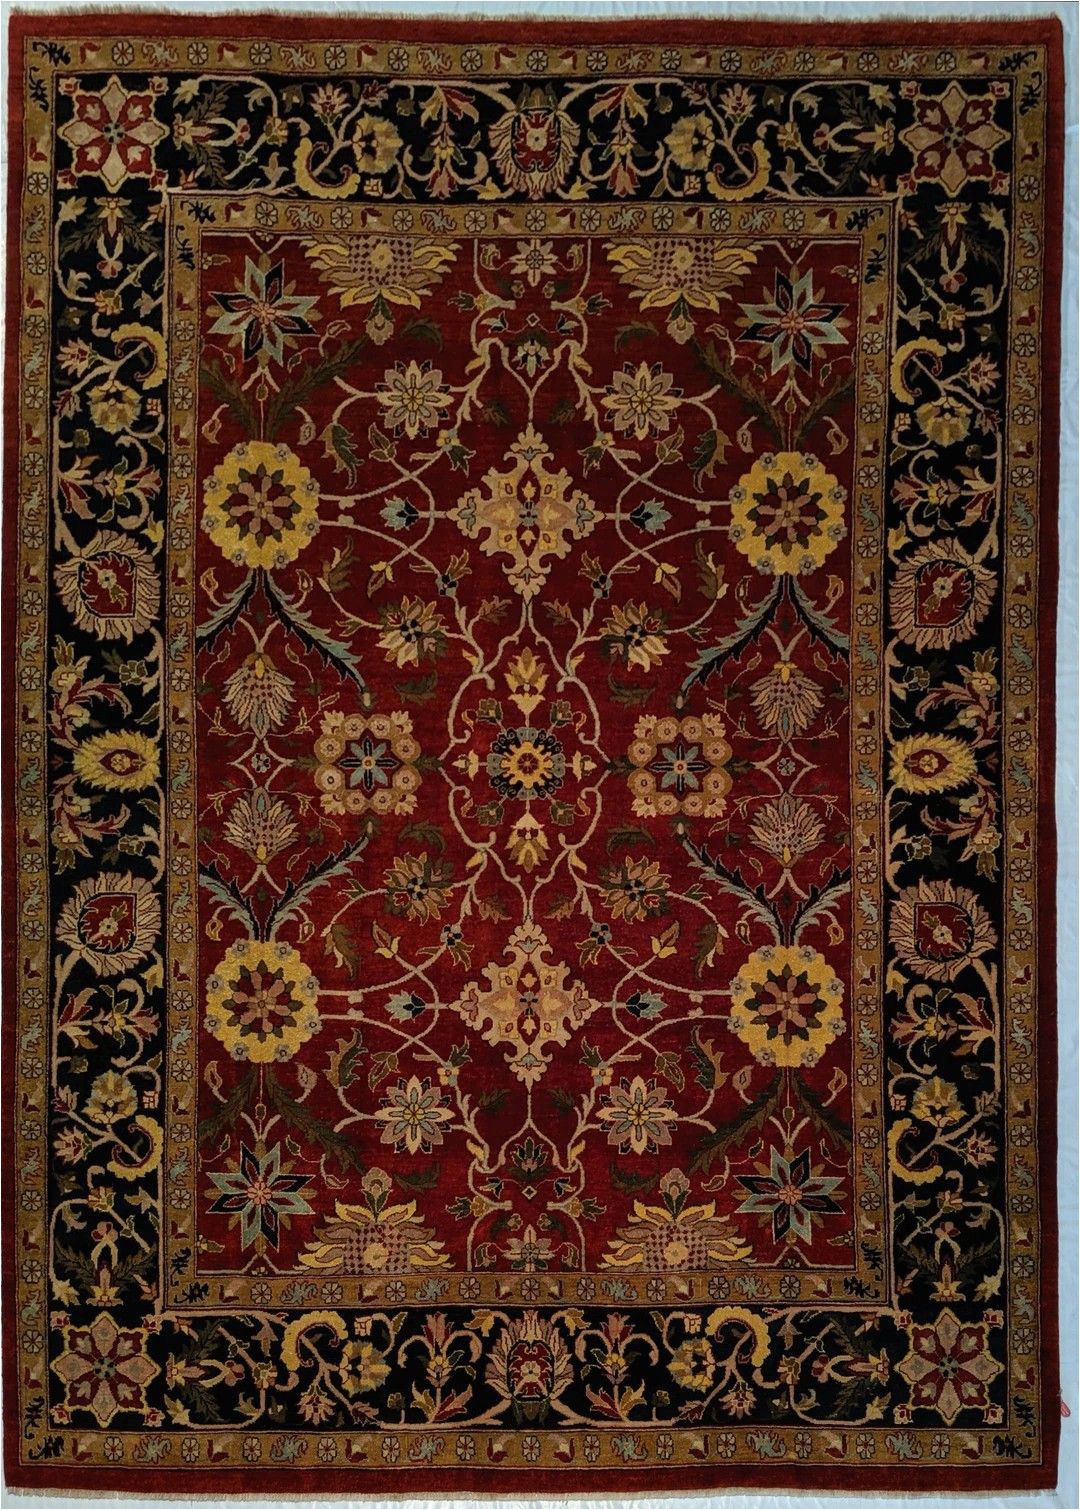 Area Rugs On Sale 9×12 Pin by Bestrugplace Handmade Rugs at On 9×12 Handmade Rugs